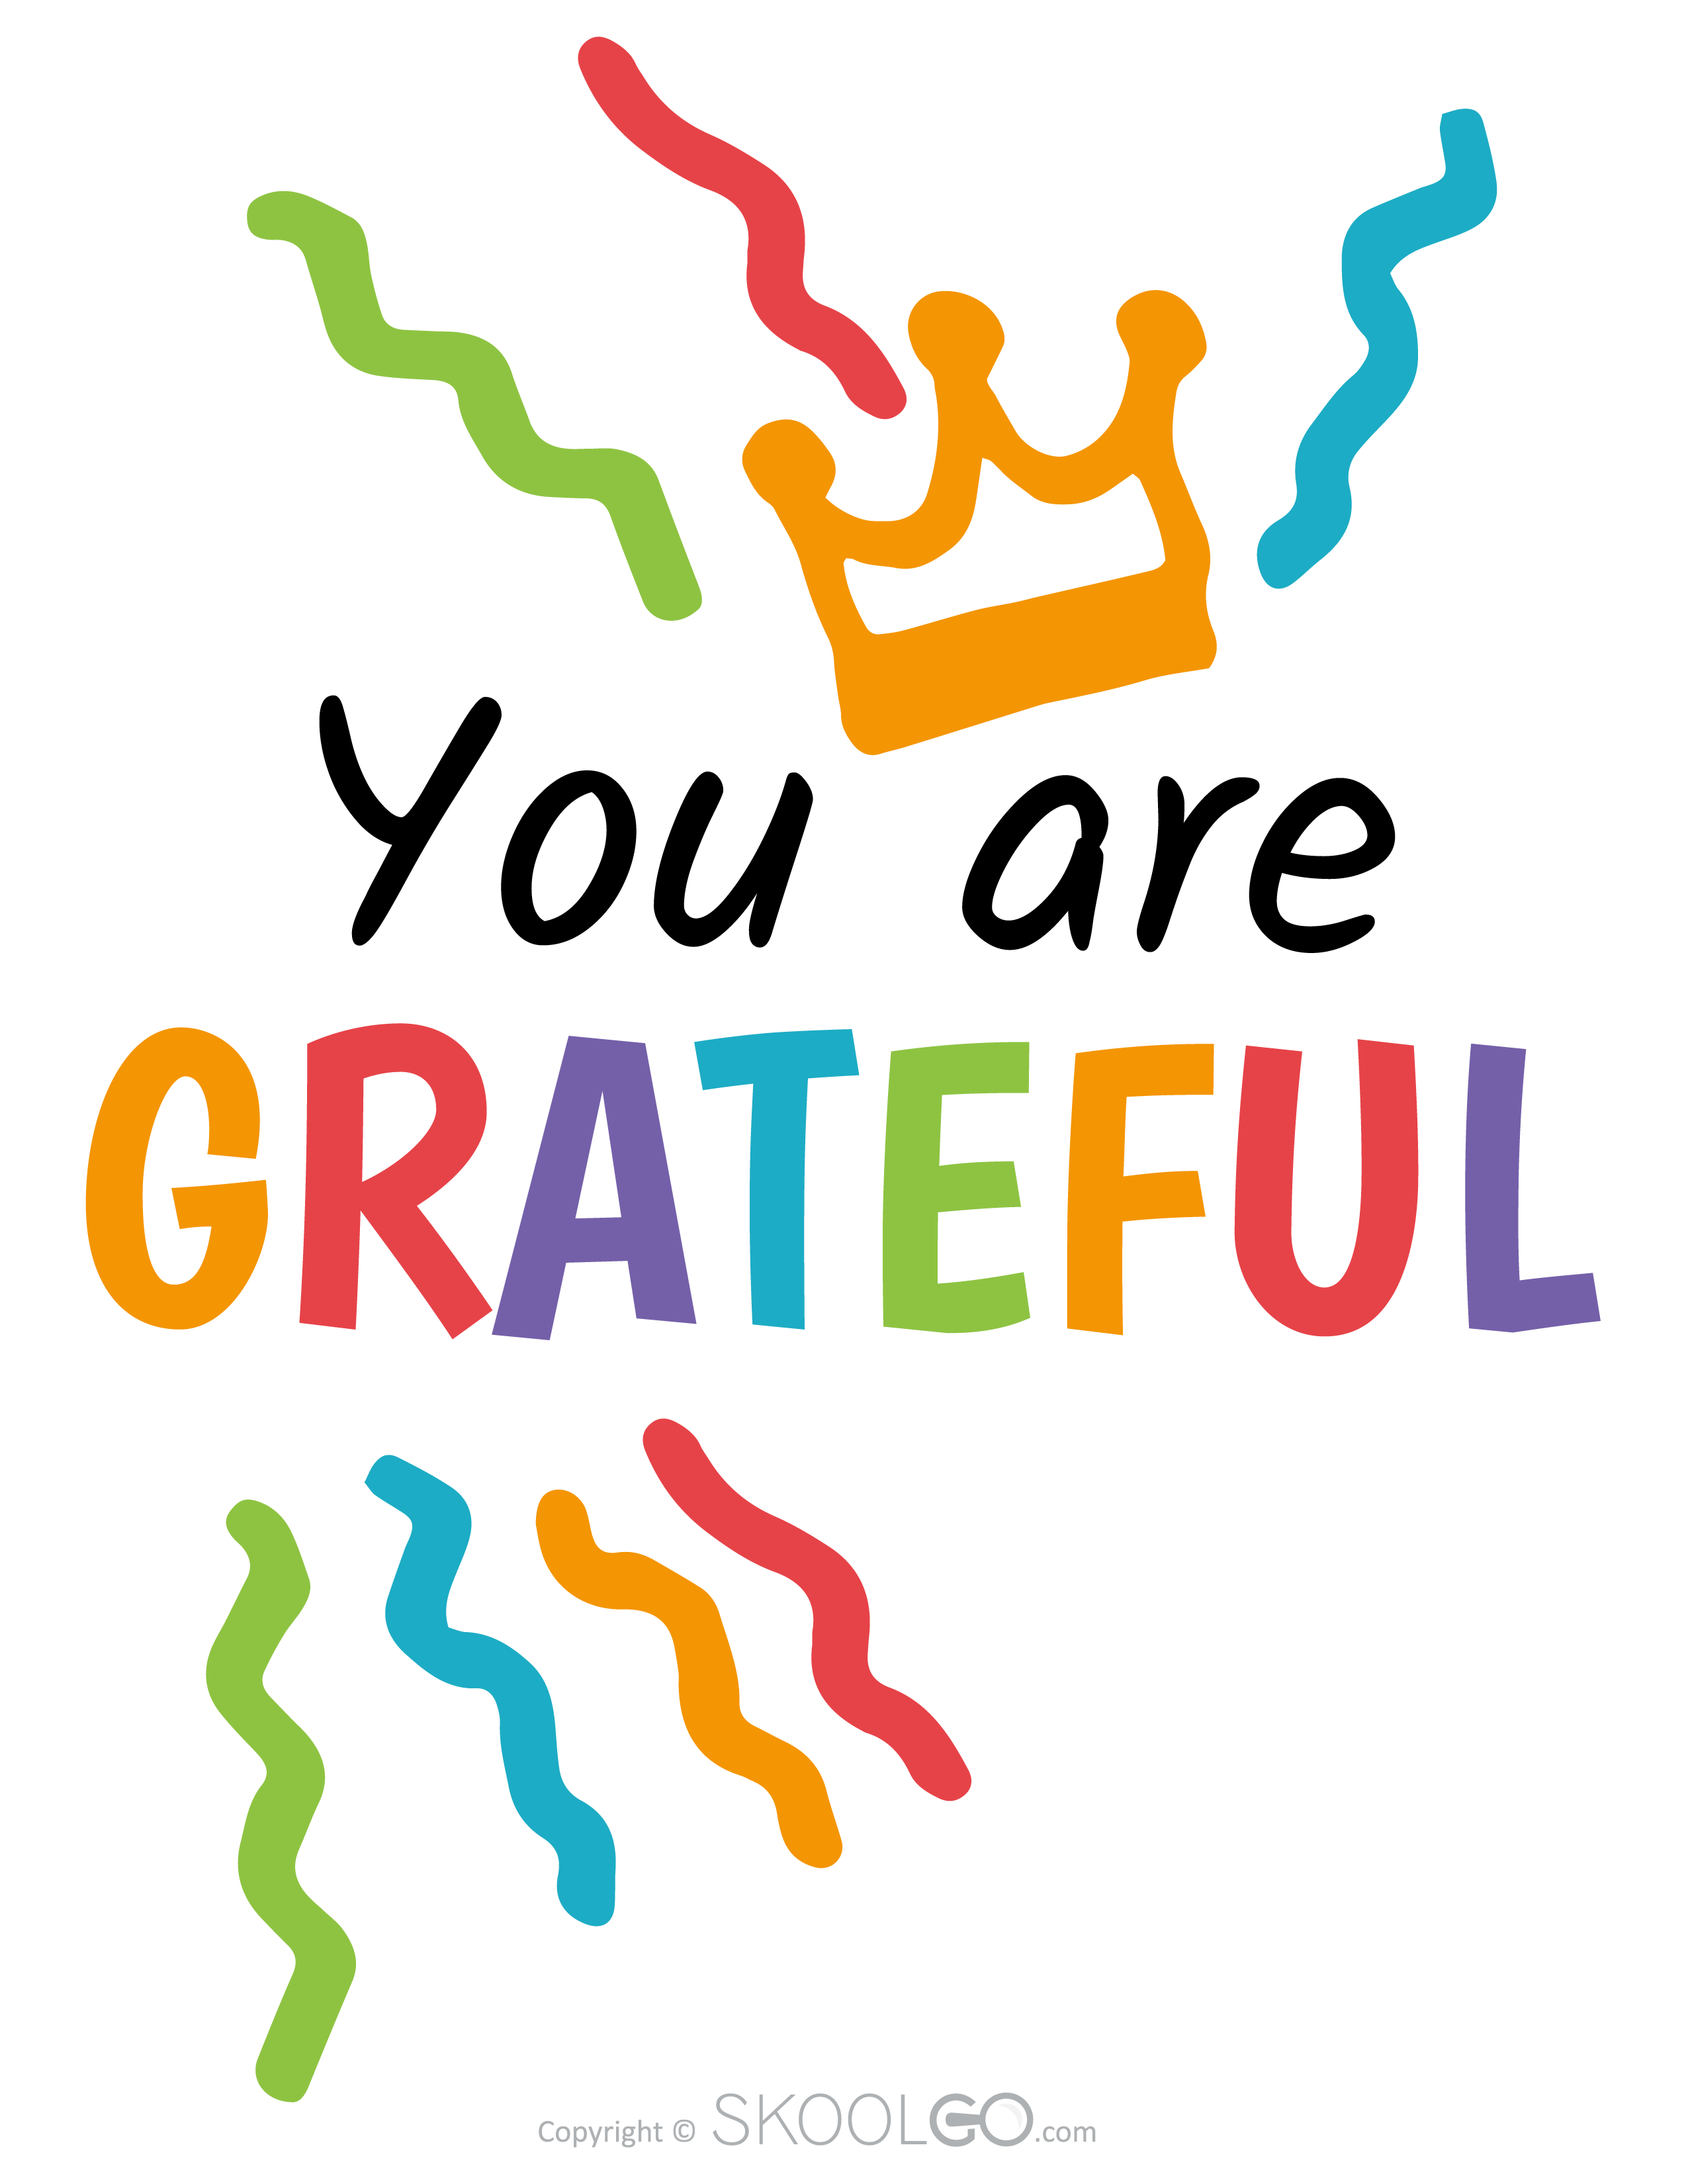 You Are Grateful - Free Poster